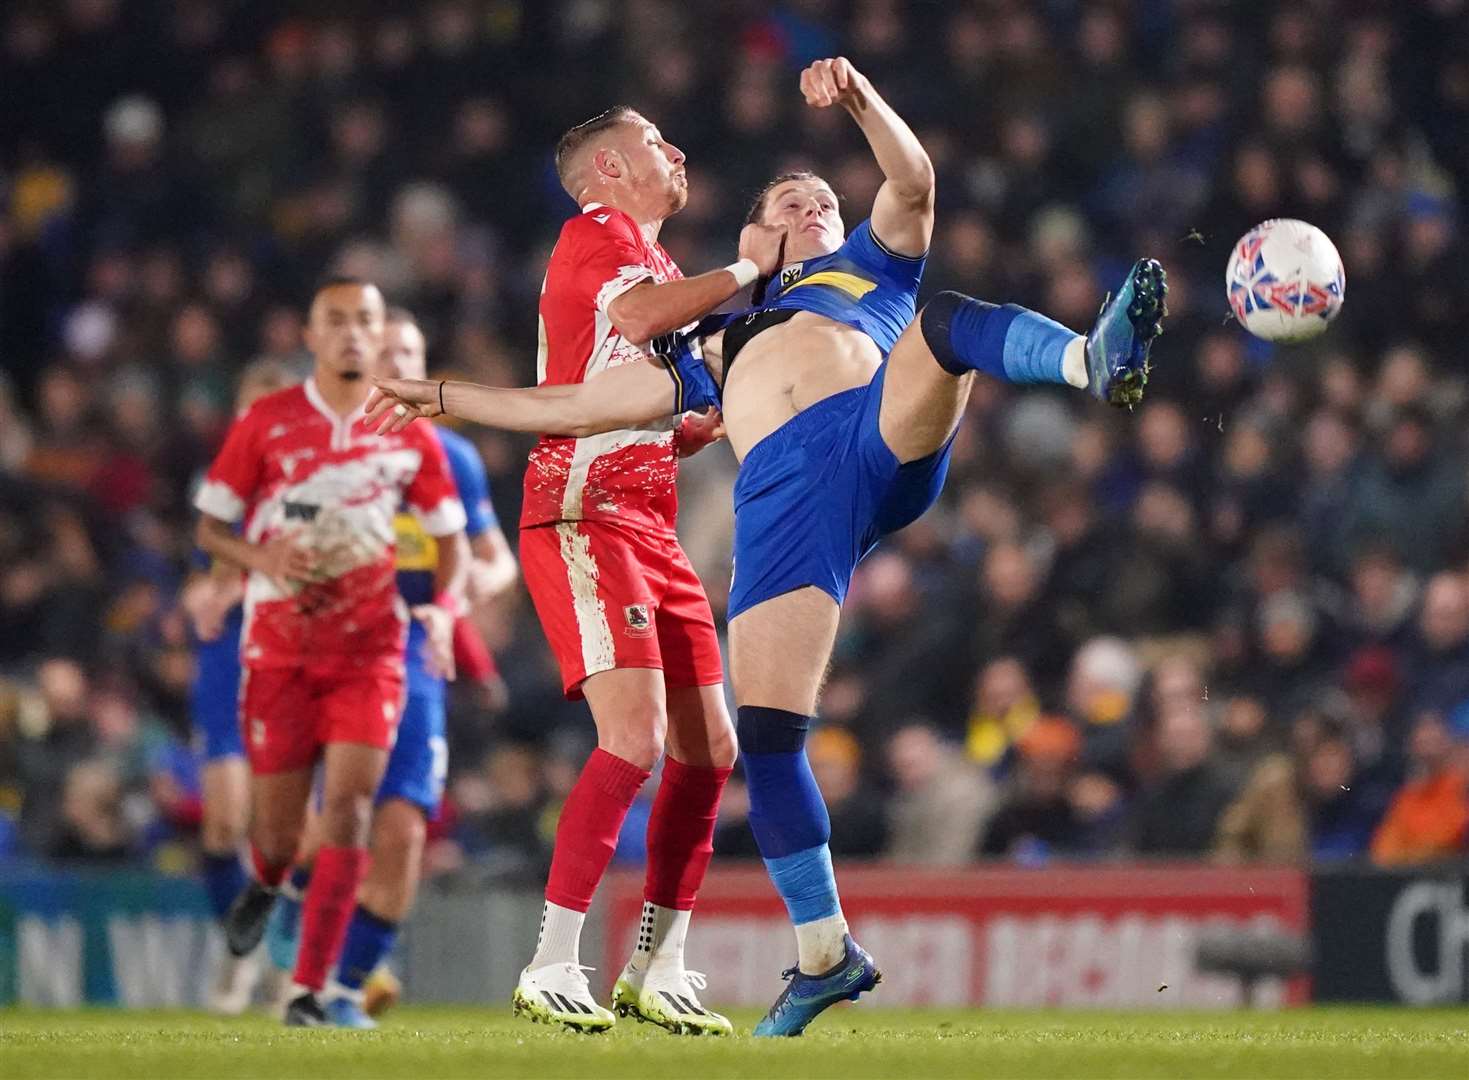 AFC Wimbledon's Josh Davison and Ramsgate's Lee Martin battle for the ball during their FA Cup Second-Round tie. Picture: PA Images